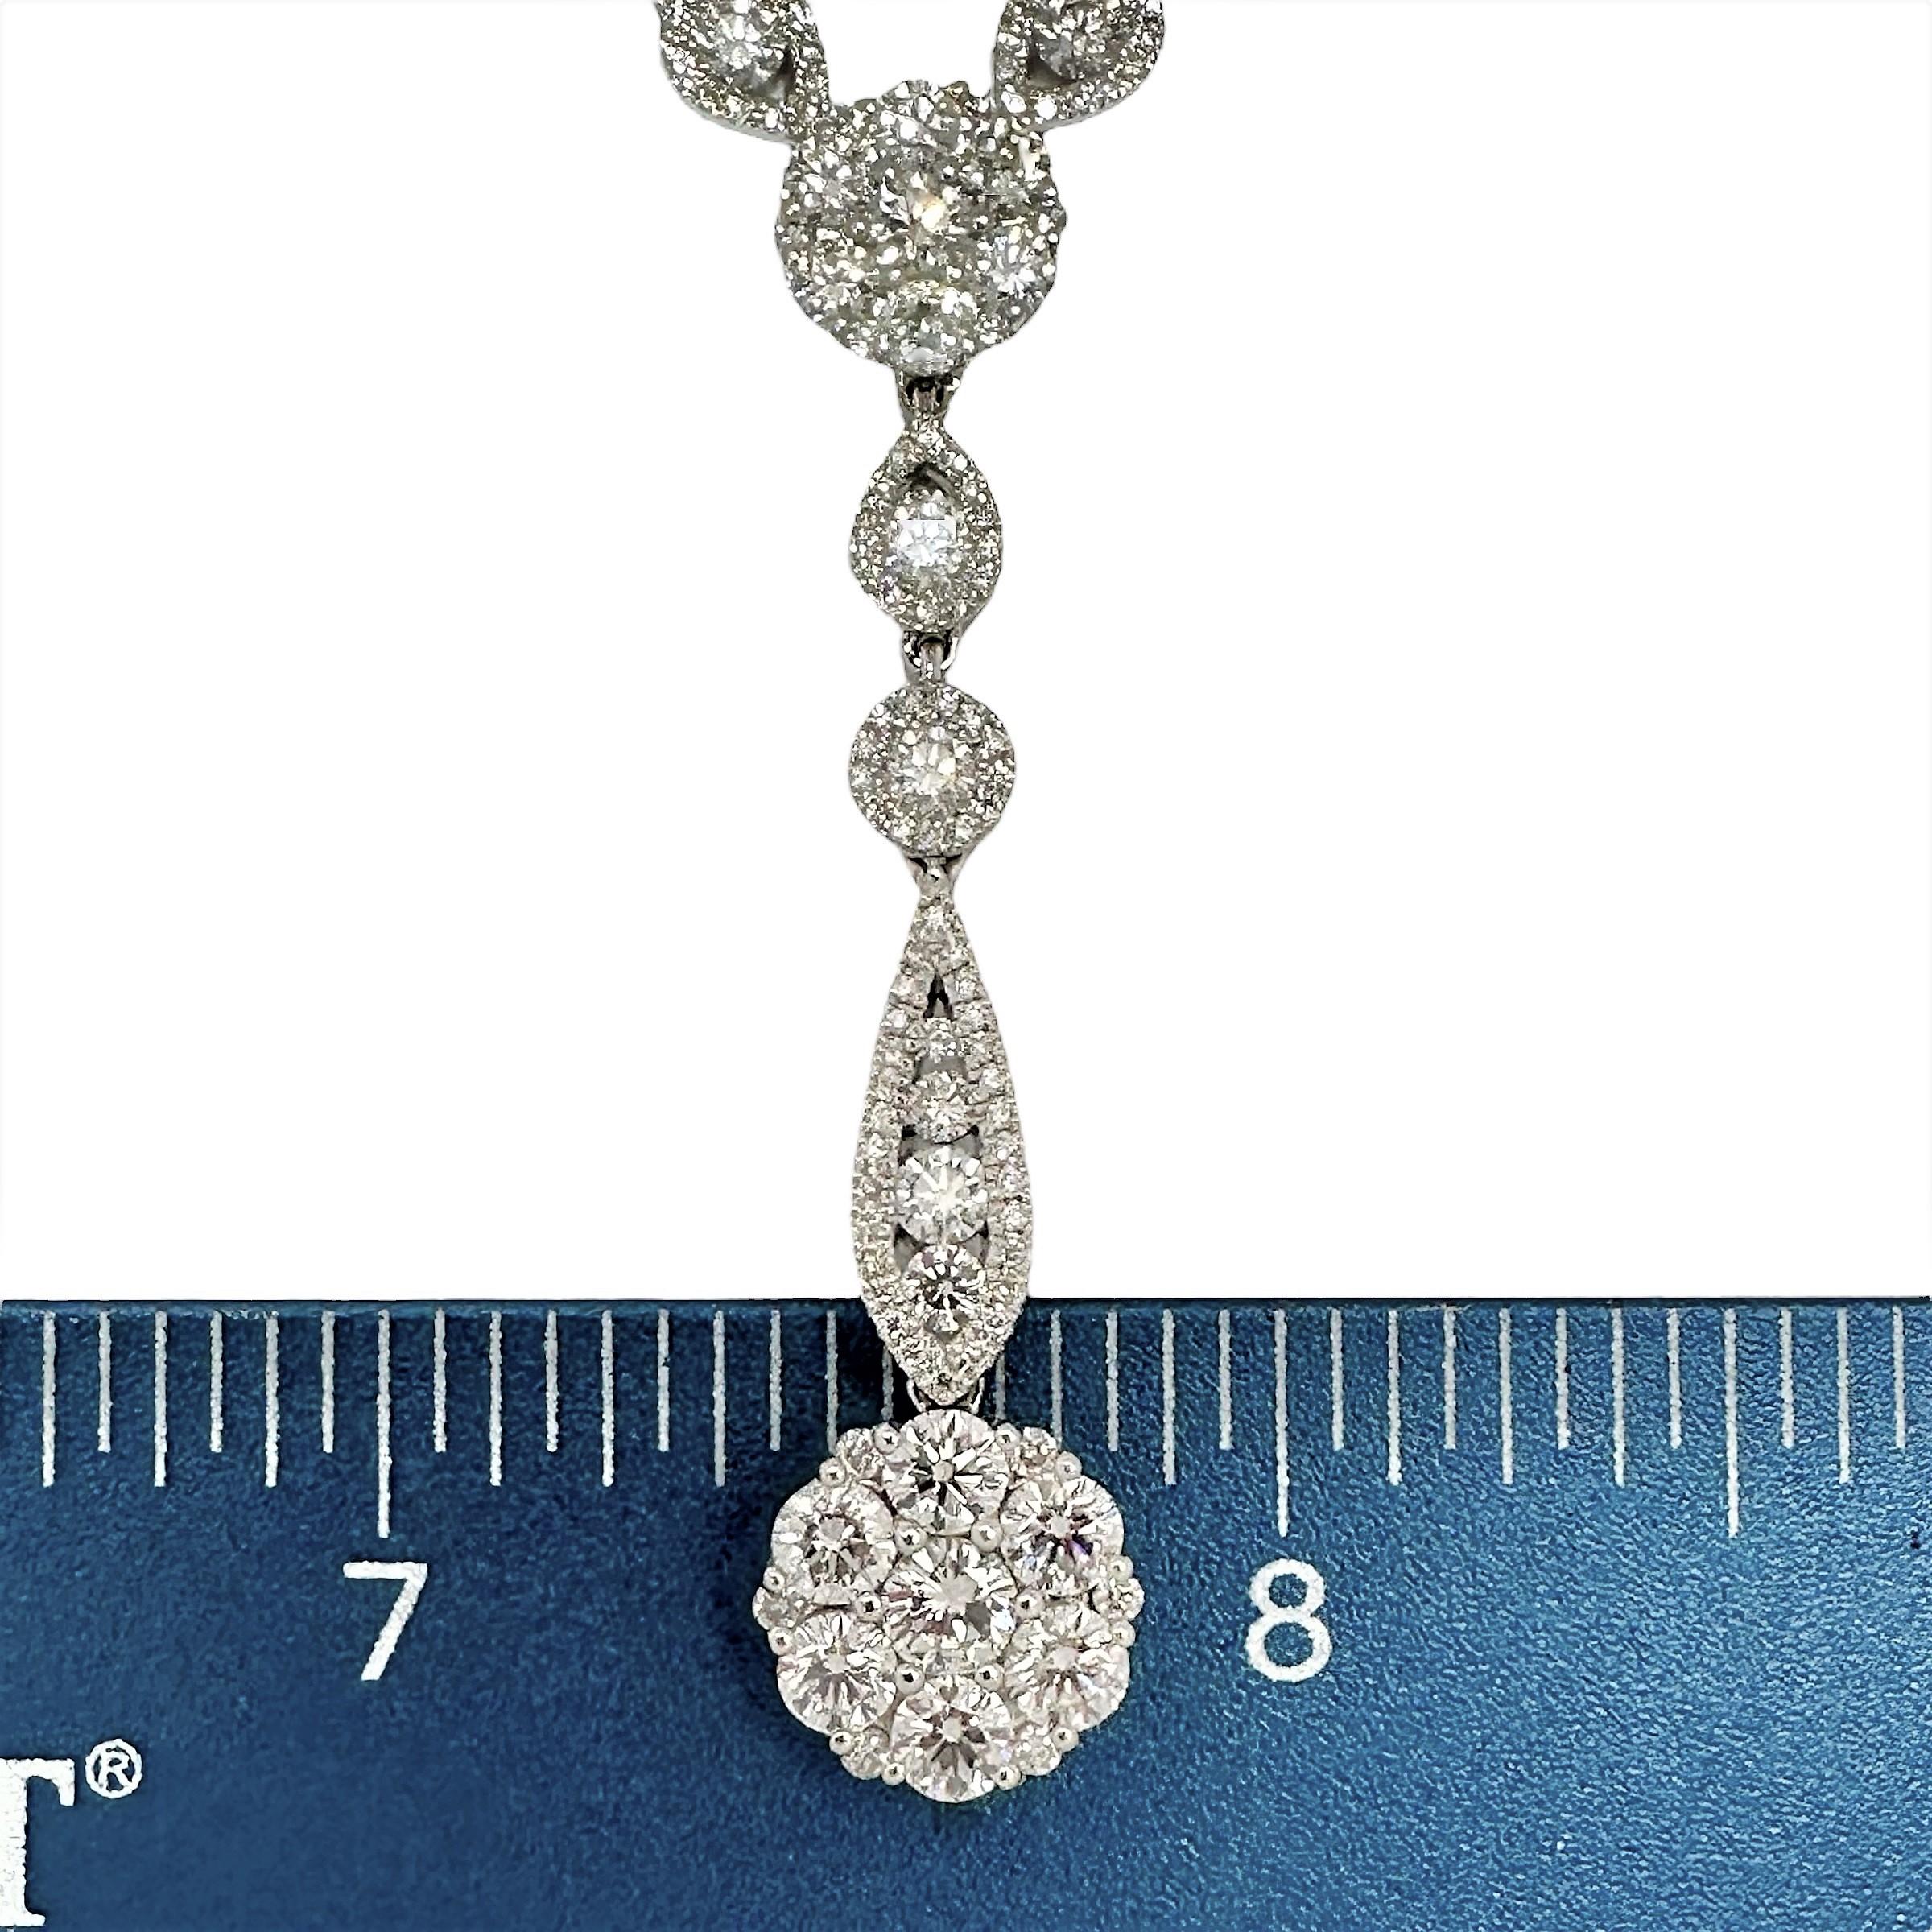 Scintillating Modern 18K White Gold Diamond Fashion Necklace with Drop For Sale 1